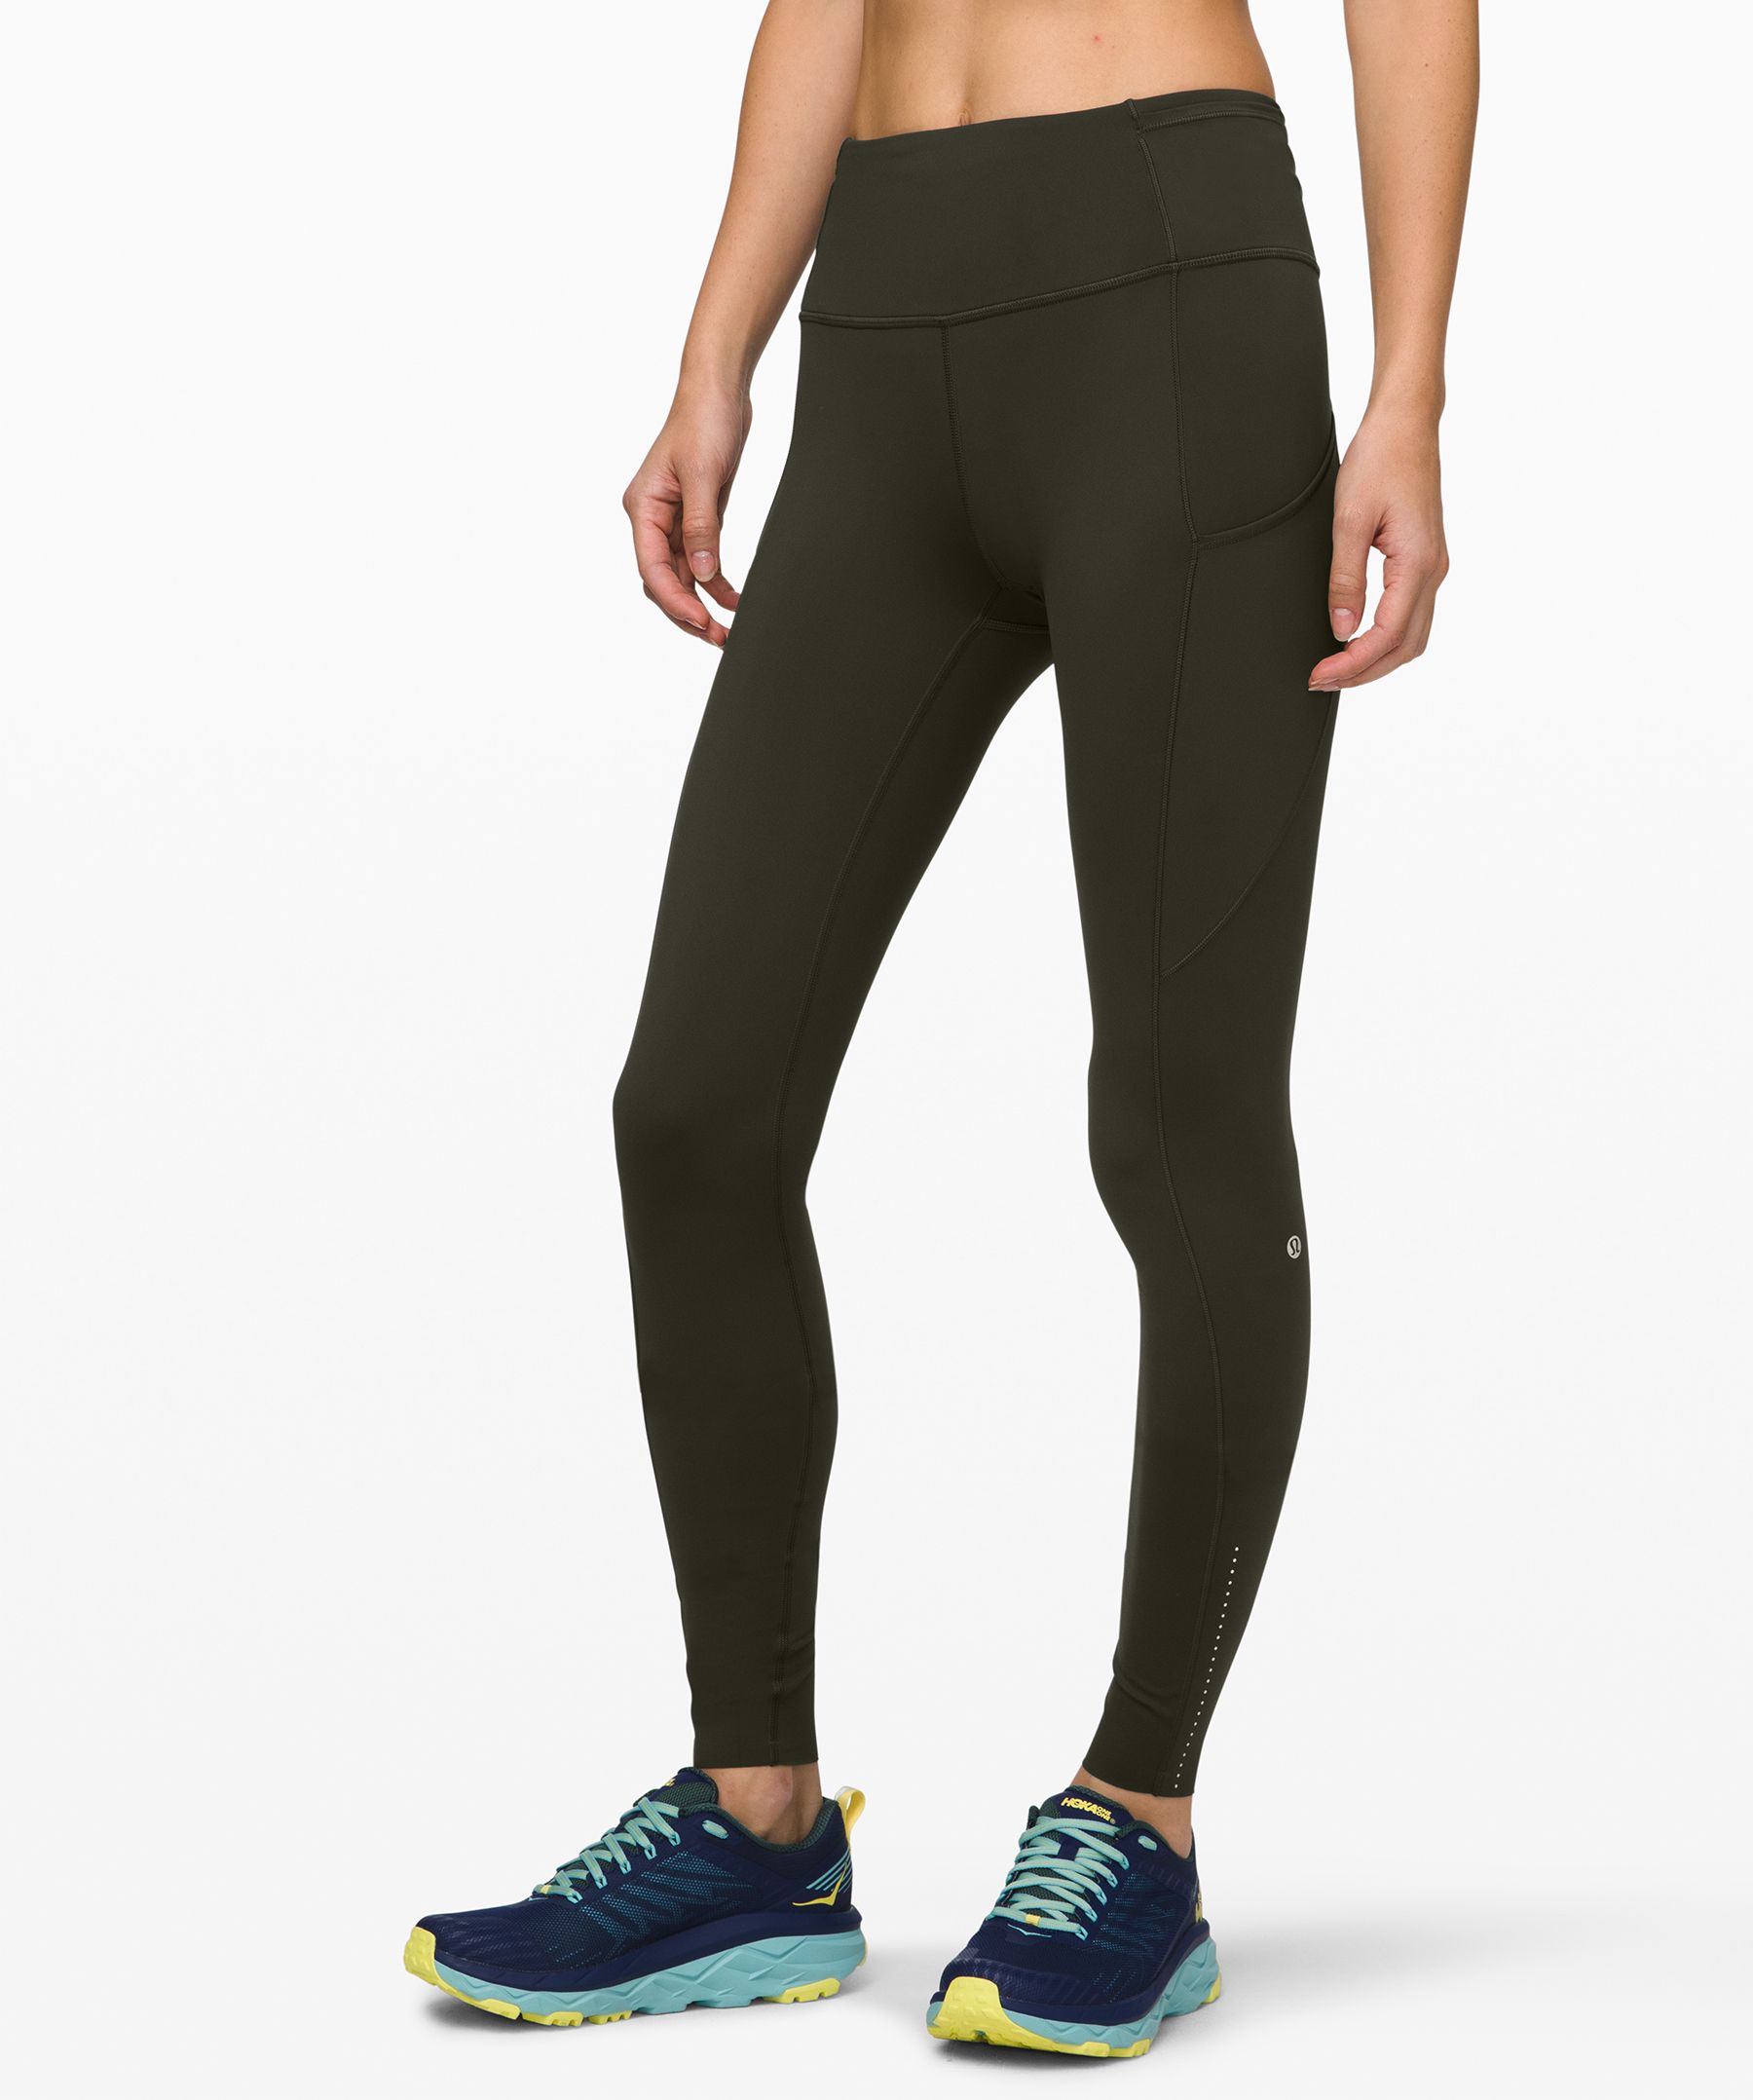 lululemon - fast and free reflective high rise tights 28' on